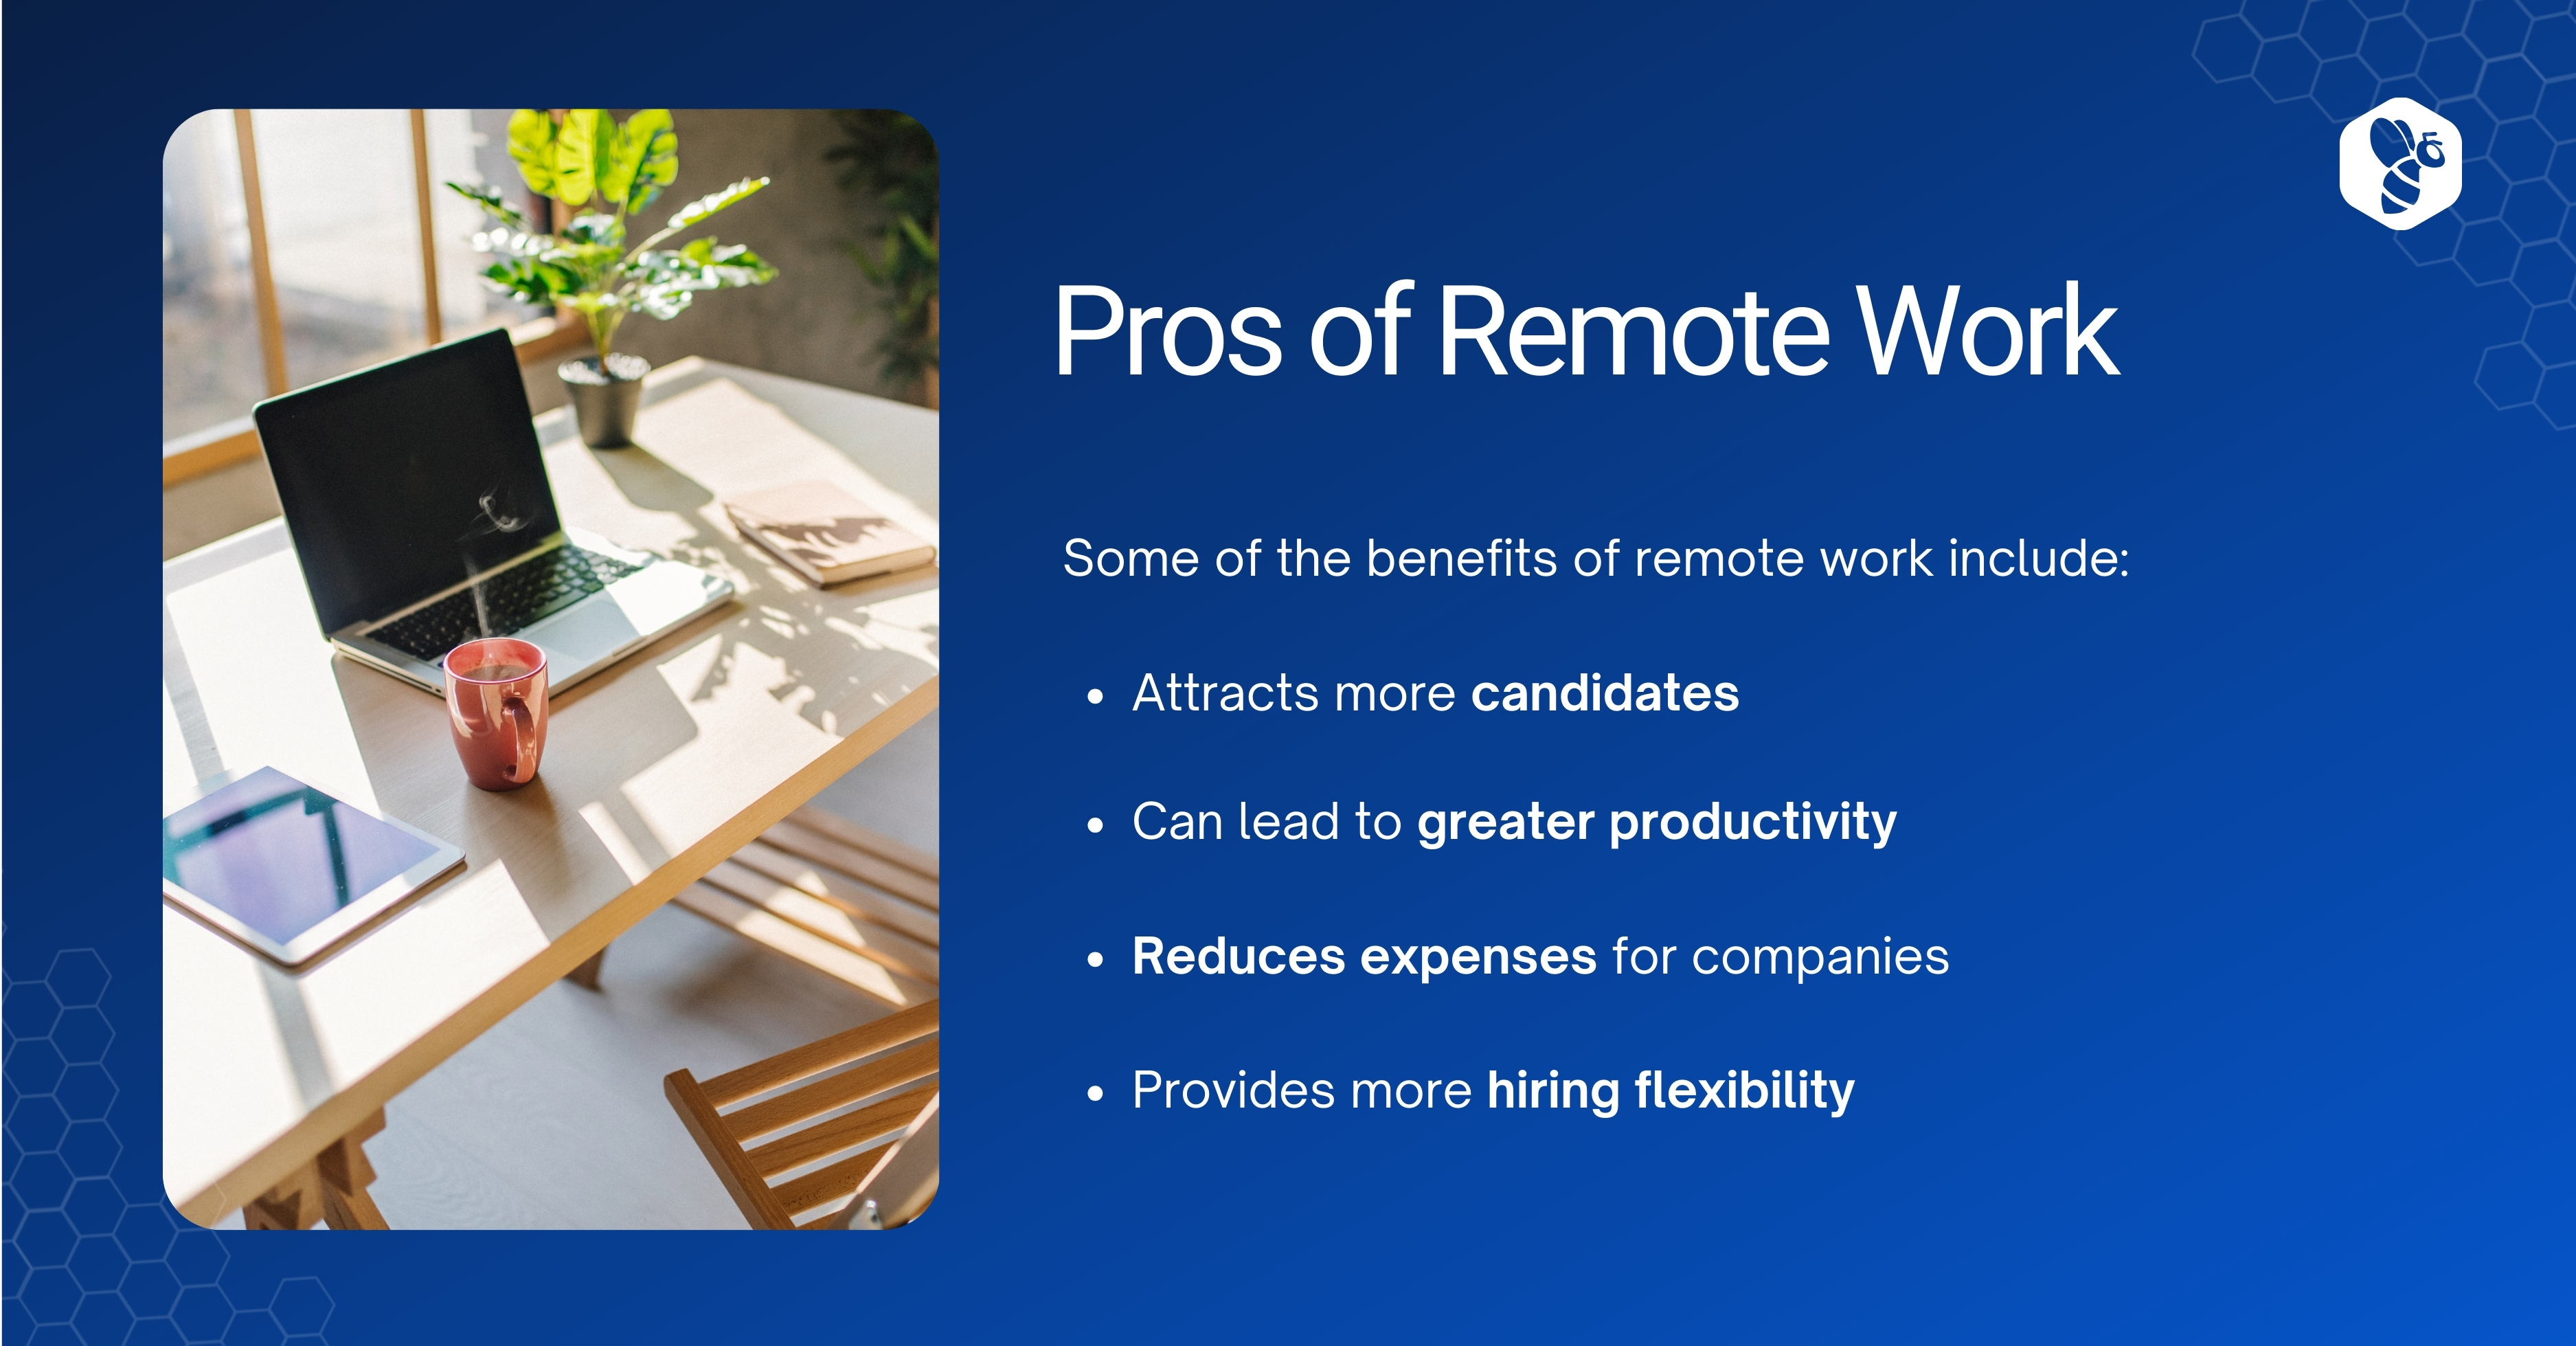 Pros of Remote Work

Some of the benefits of remote work include:

SNRR' « Attracts more candidates
ay « Can lead to greater productivity
Reduces expenses for companies

» Provides more hiring flexibility